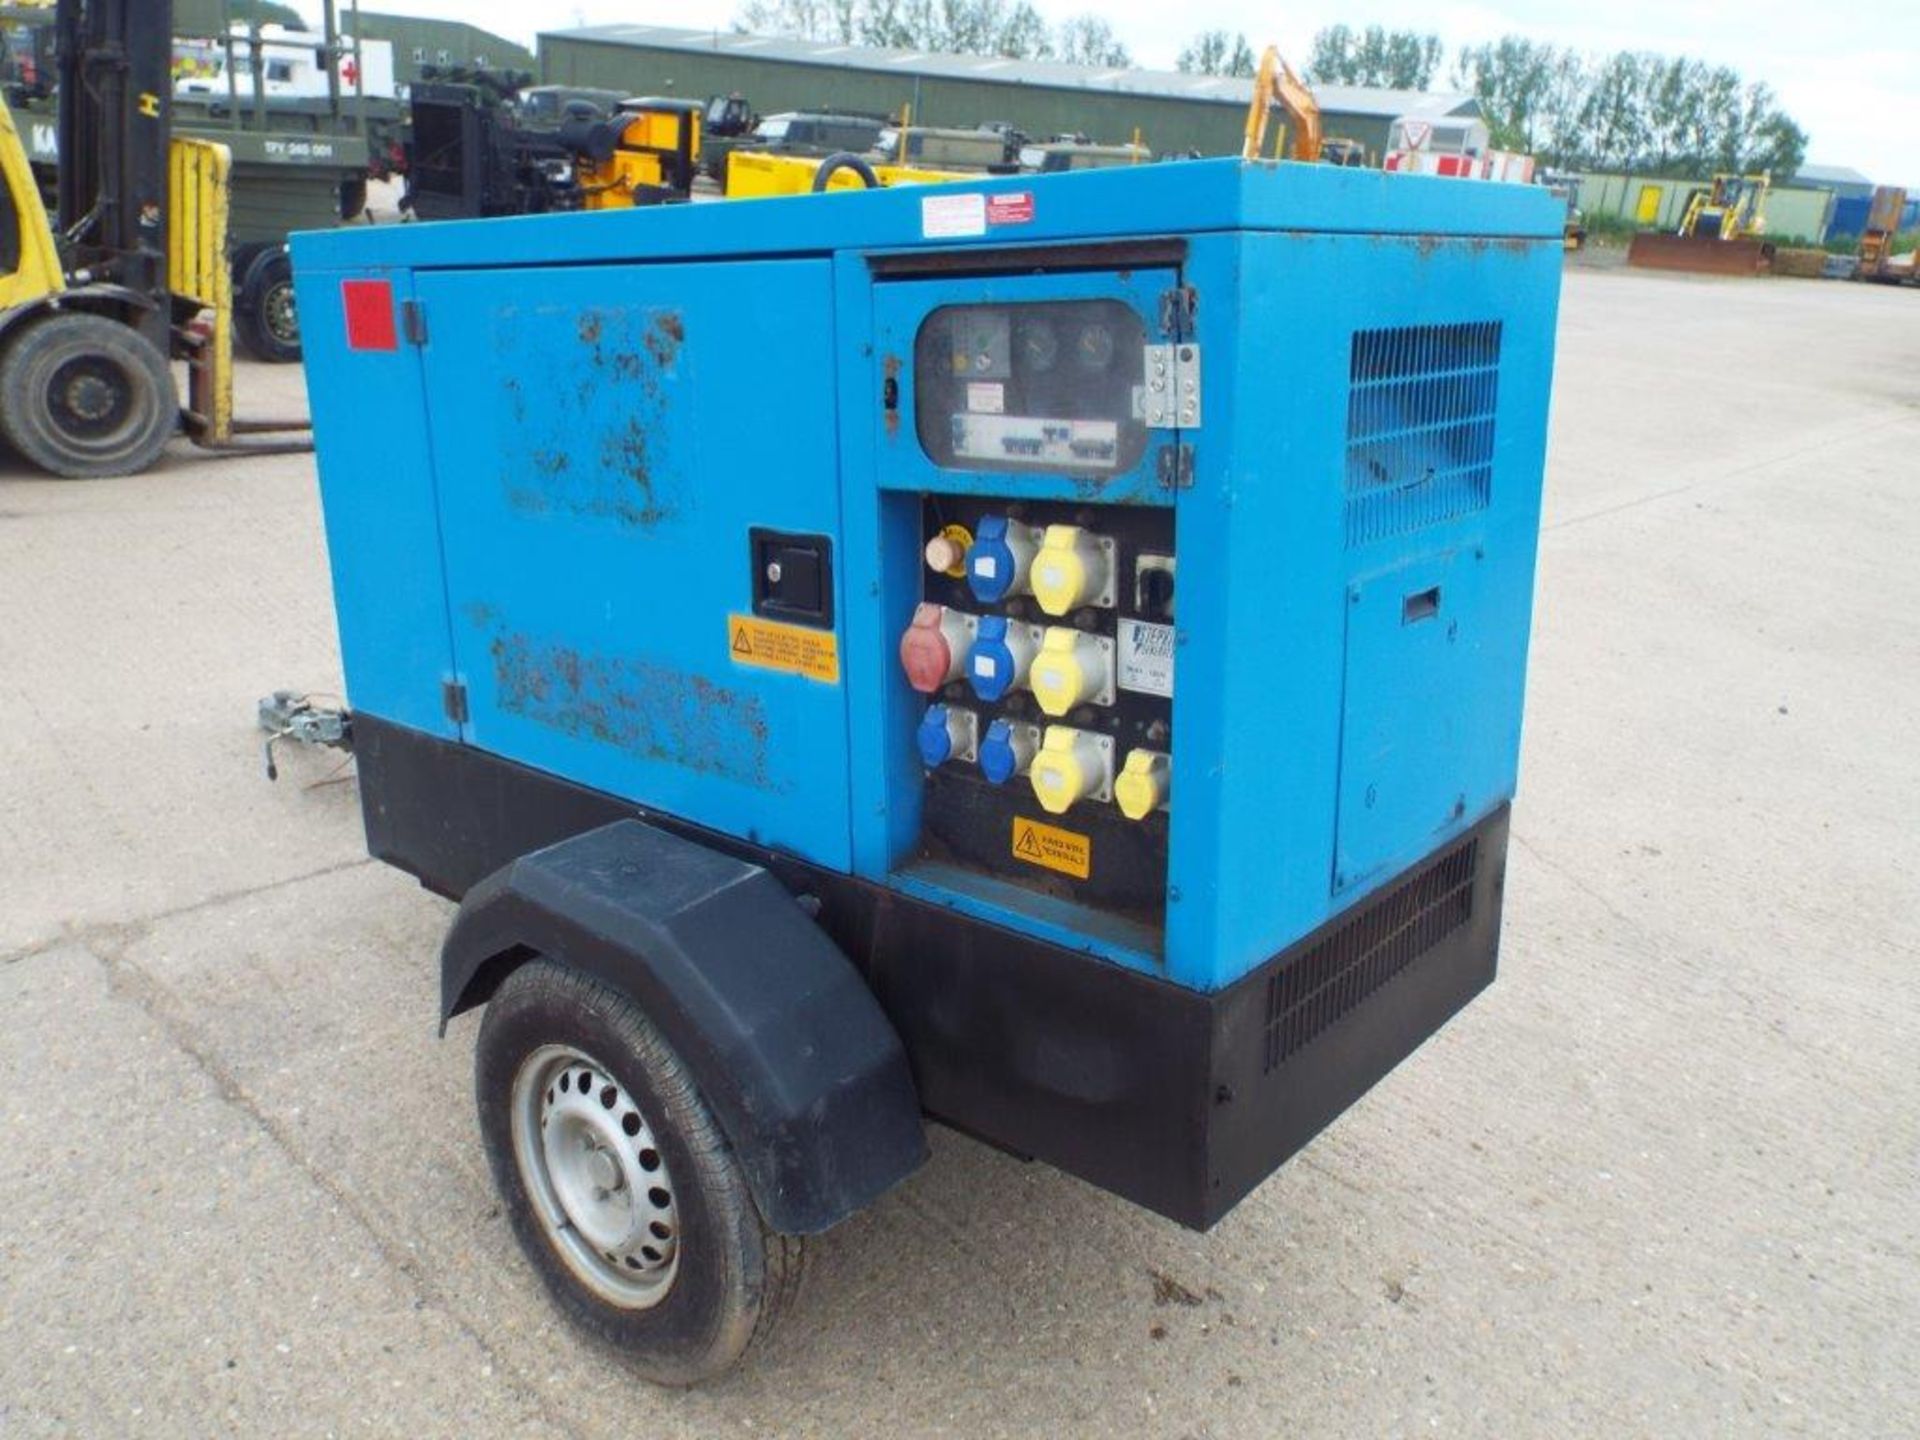 Stephill Generators Trailer Mounted 20 kVA 400V 3 Phase Diesel Generator ONLY 1,820 HOURS! - Image 3 of 19